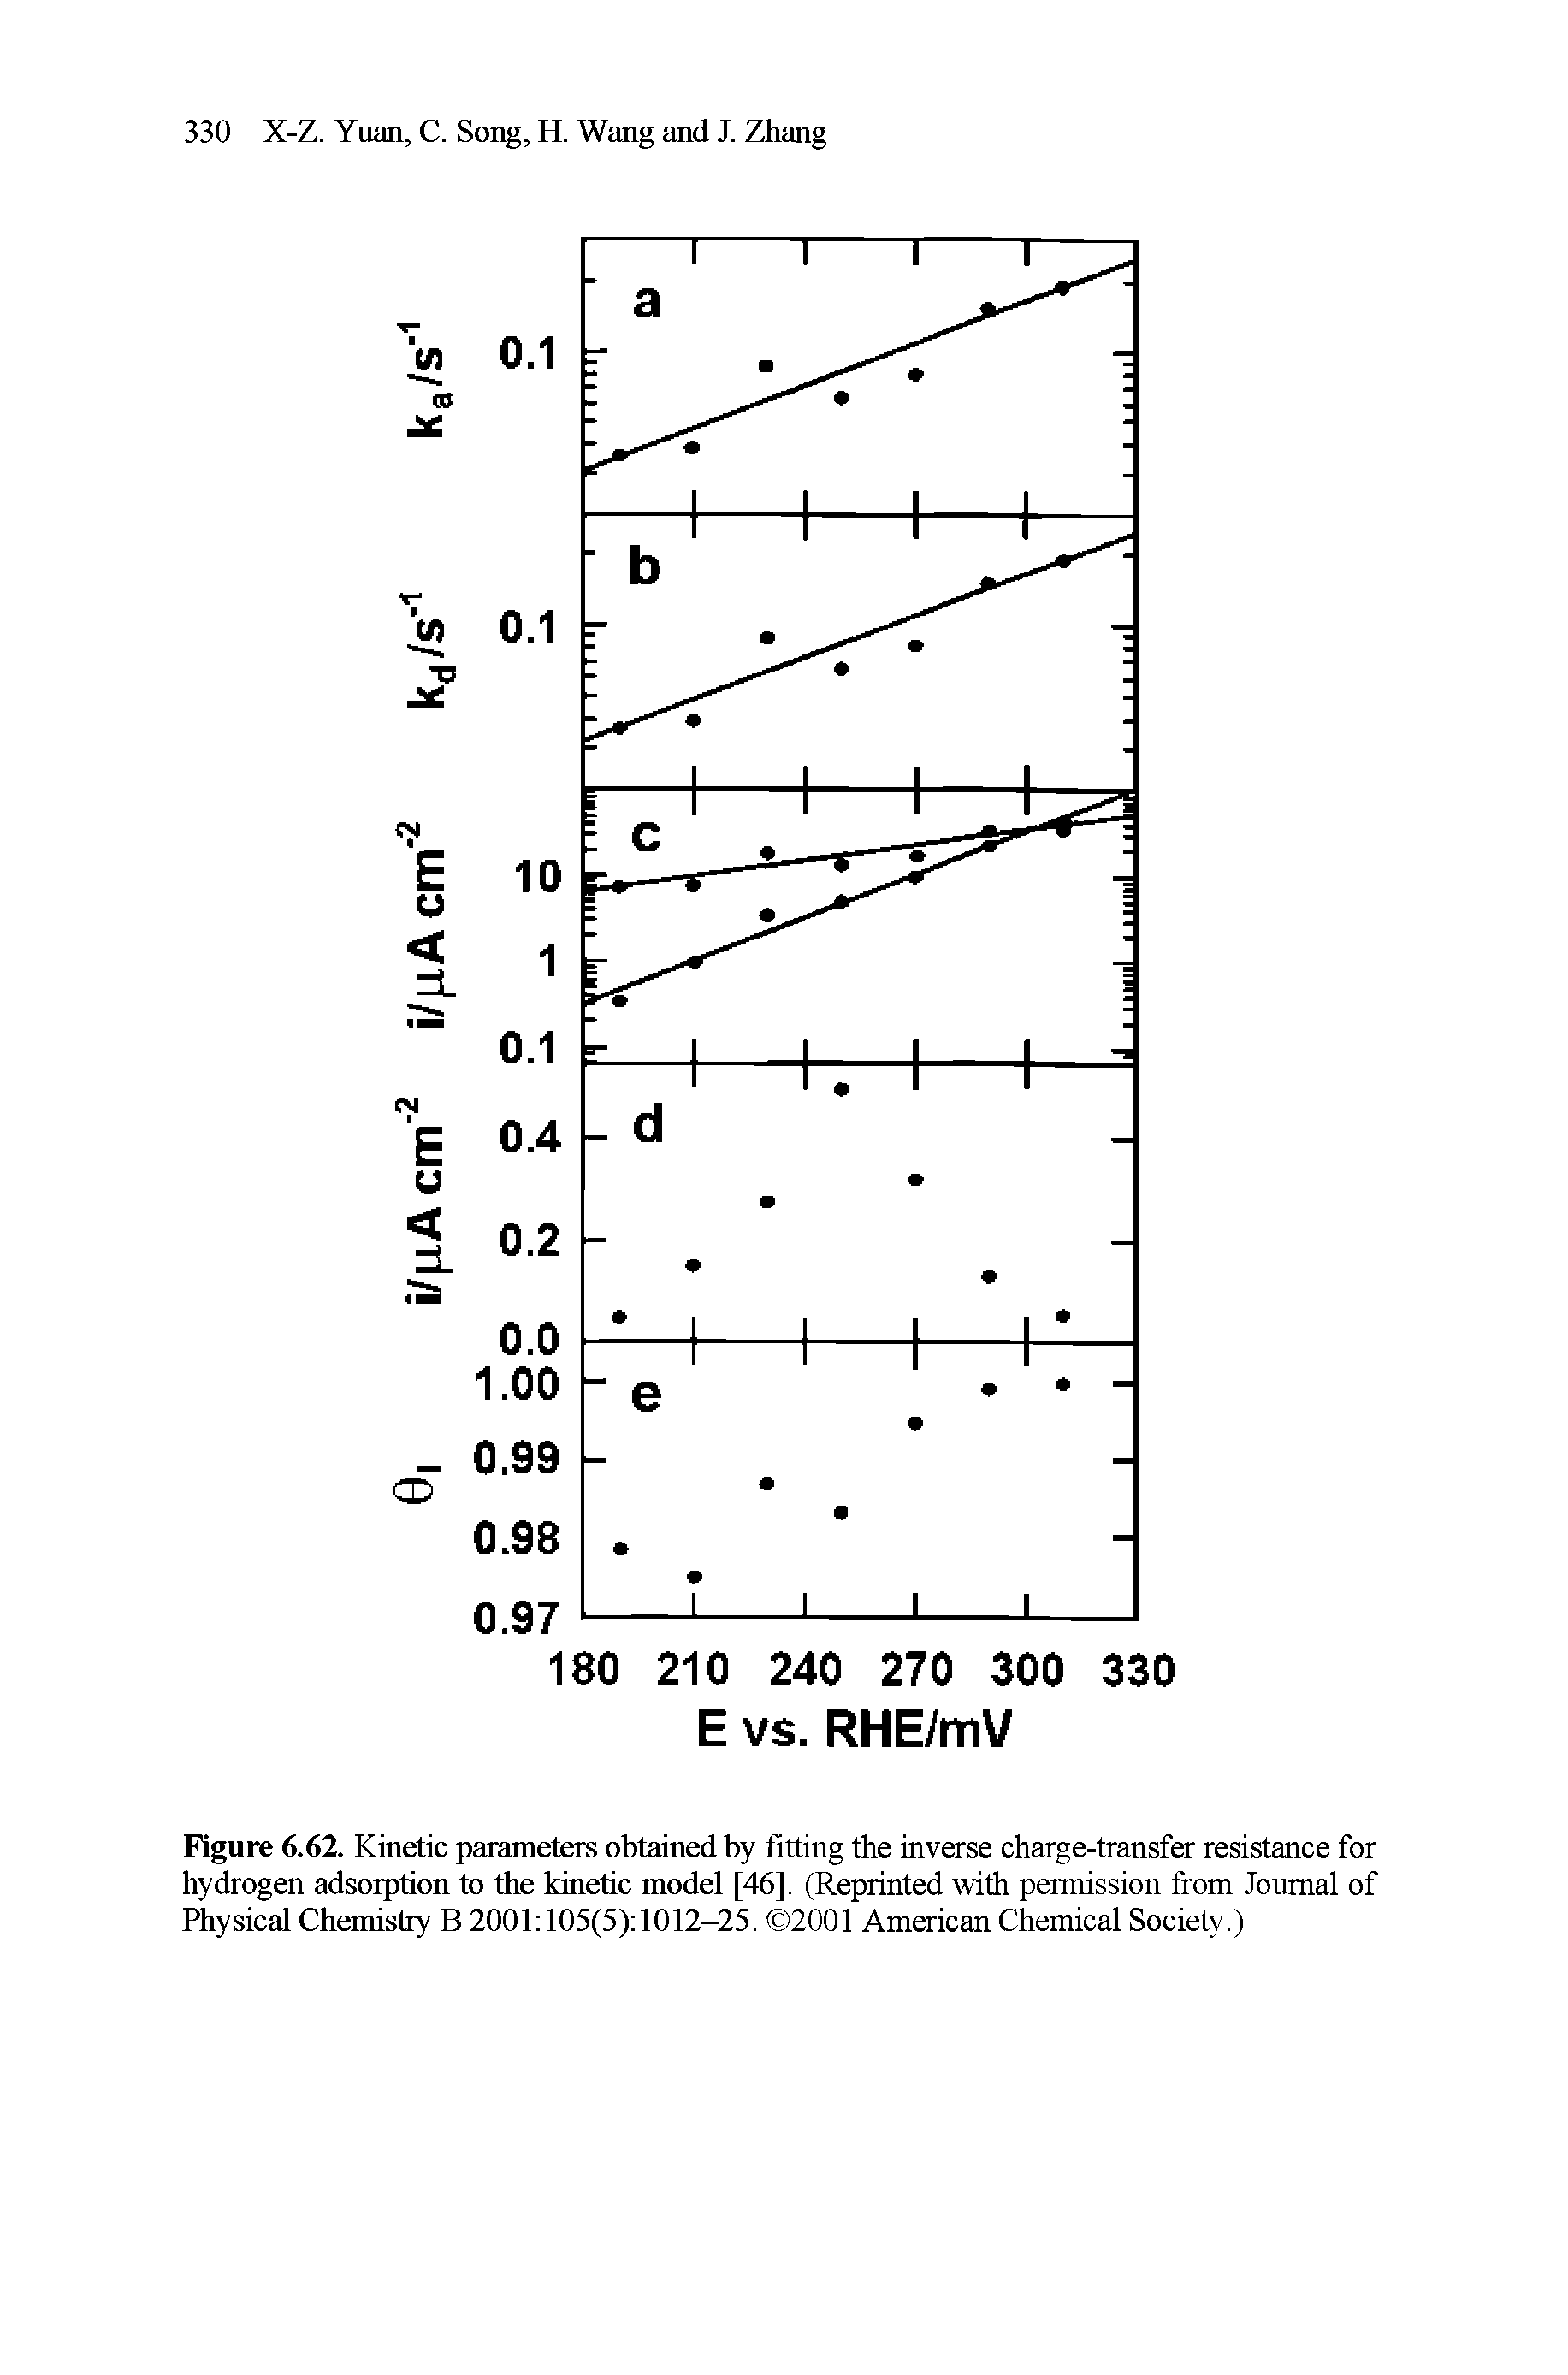 Figure 6.62. Kinetic parameters obtained by fitting the inverse charge-transfer resistance for hydrogen adsorption to the kinetic model [46], (Reprinted with permission from Journal of Physical Chemistry B 2001 105(5) 1012-25. 2001 American Chemical Society.)...